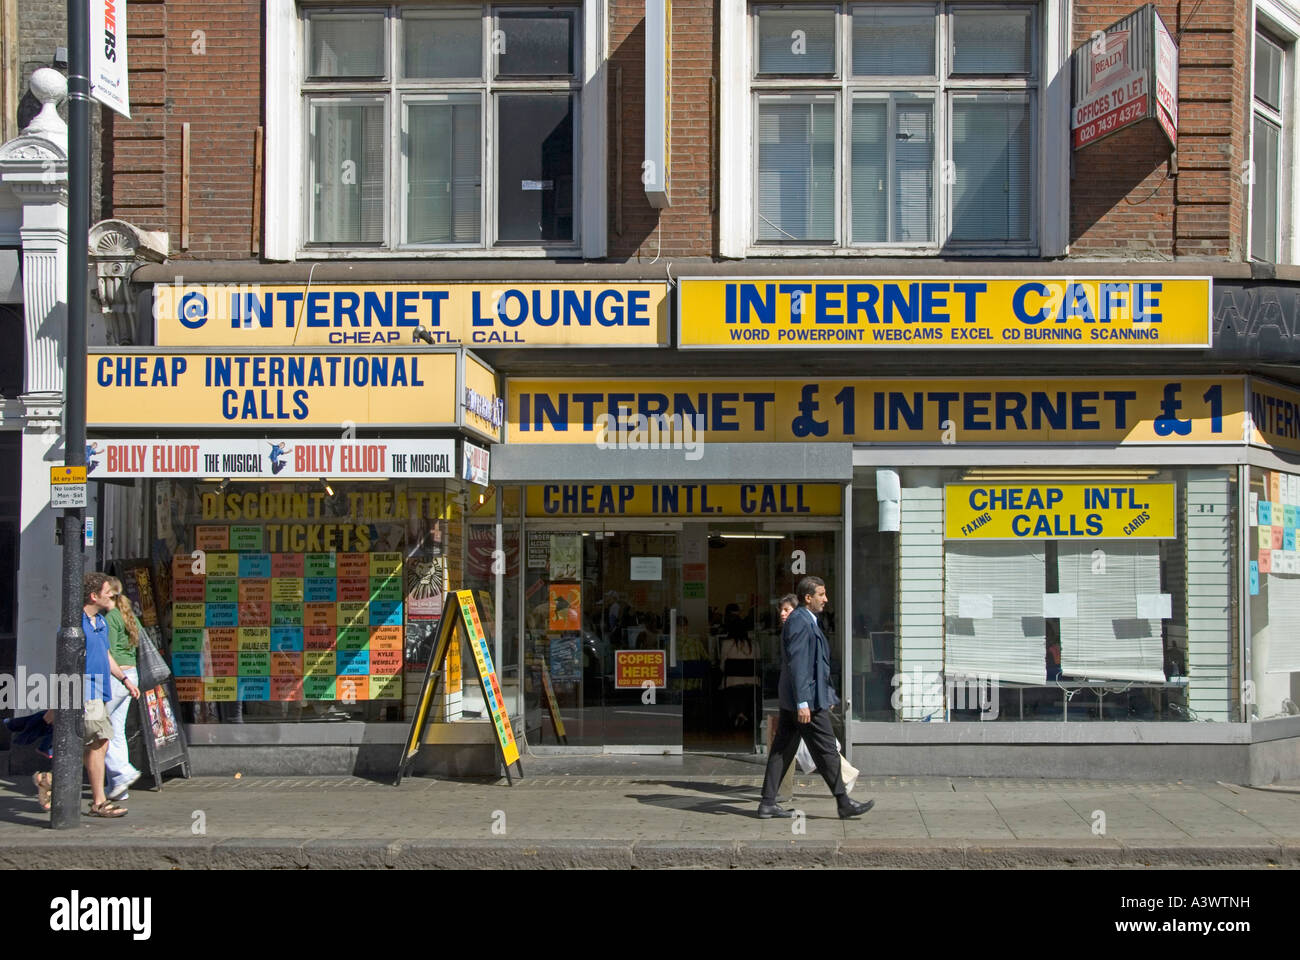 Shop premises operating Internet lounge cafe cheap international phone calls facilities & discount theatre ticket booking City of London England UK Stock Photo